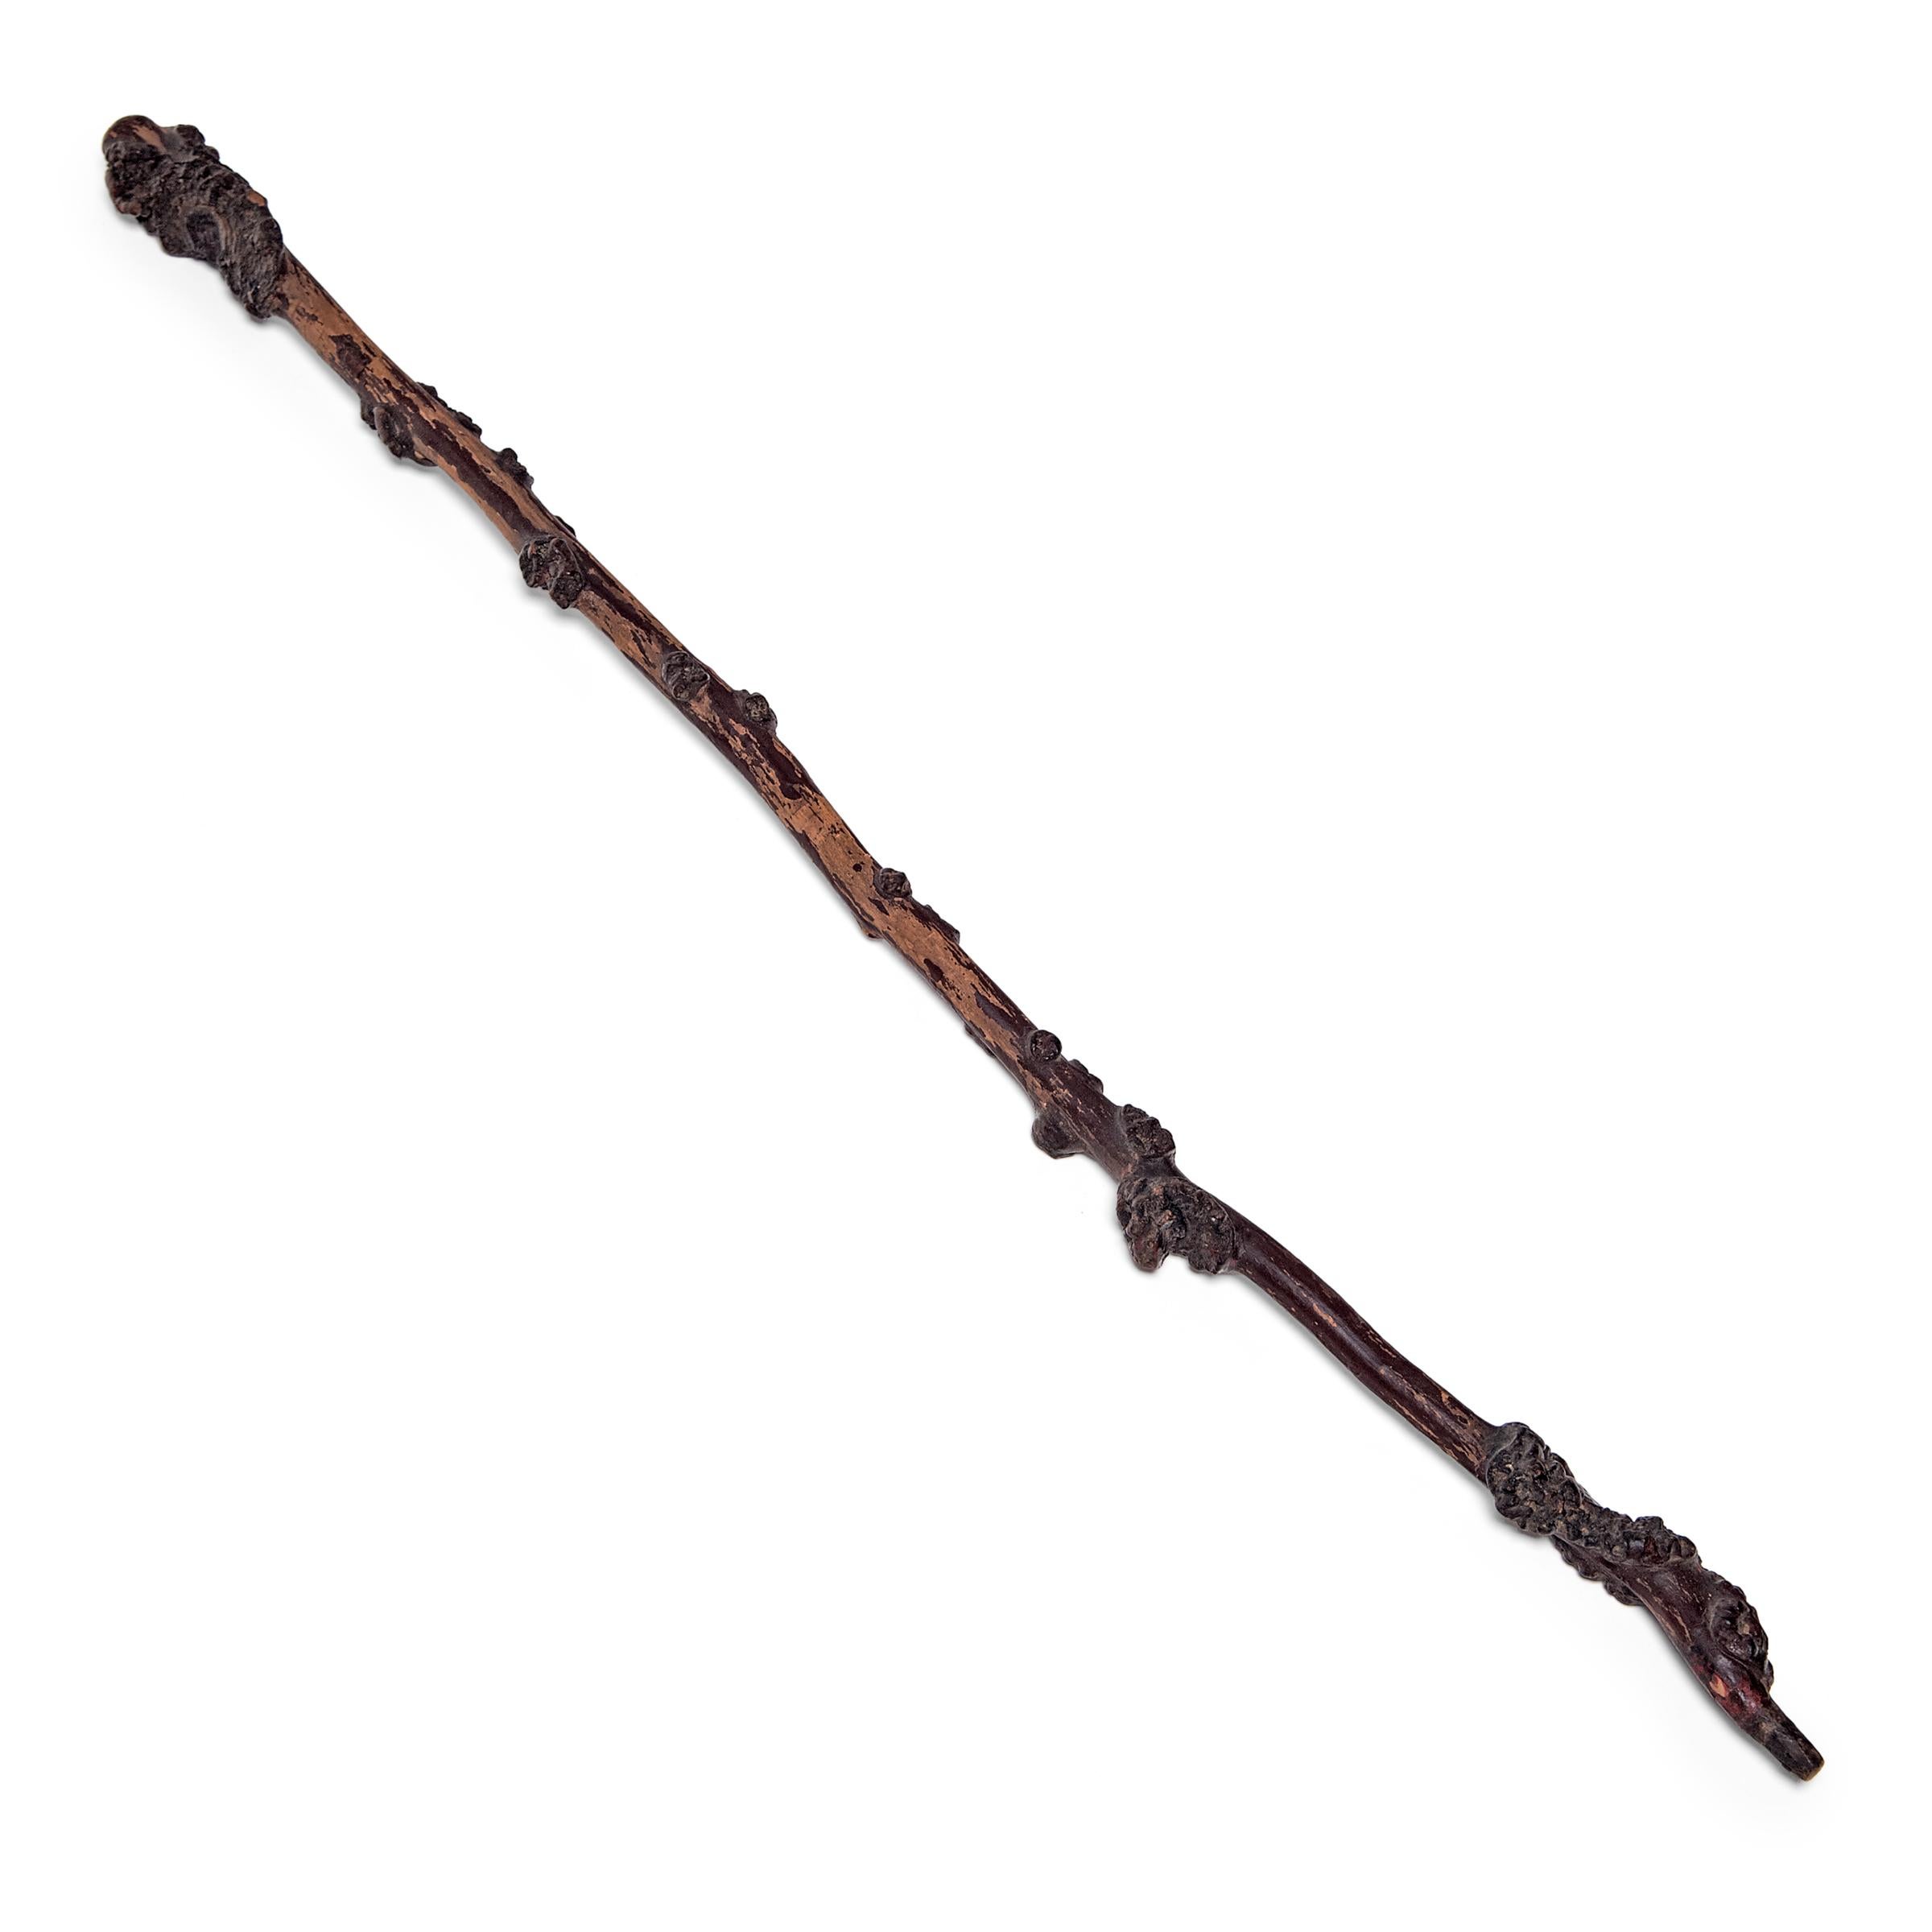 Hand-Carved Chinese Knotted Walking Stick, c. 1900